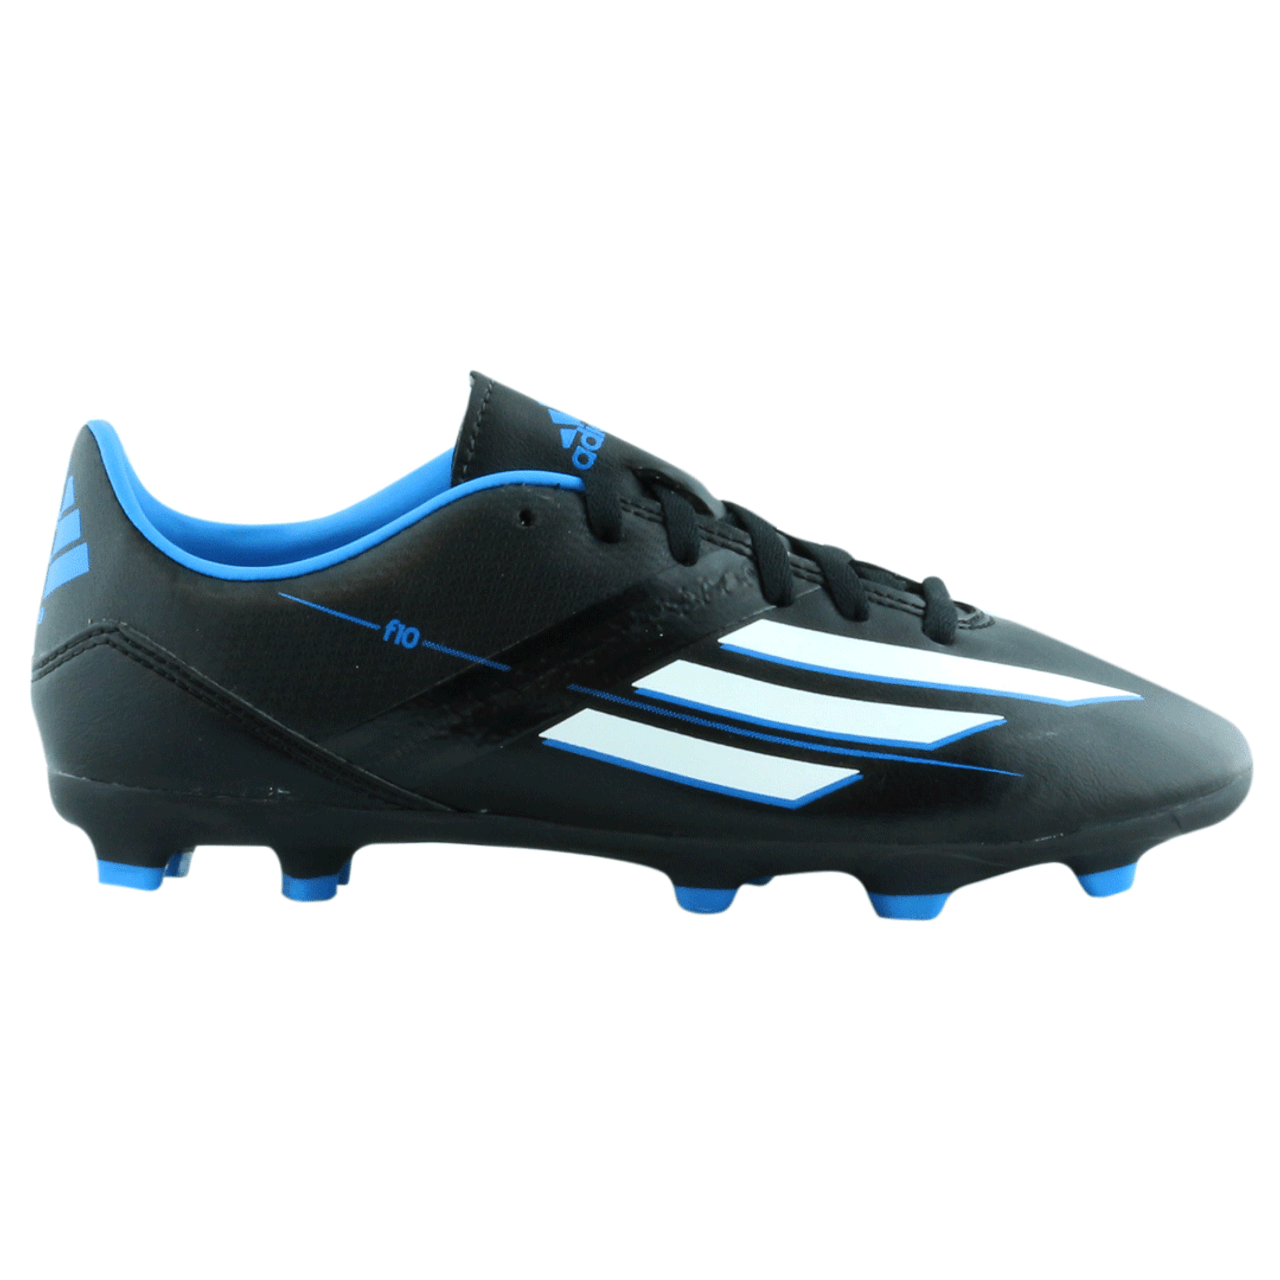 F10 TRX FG Youth Rugby Boots on sale at Rugby City | 59.99